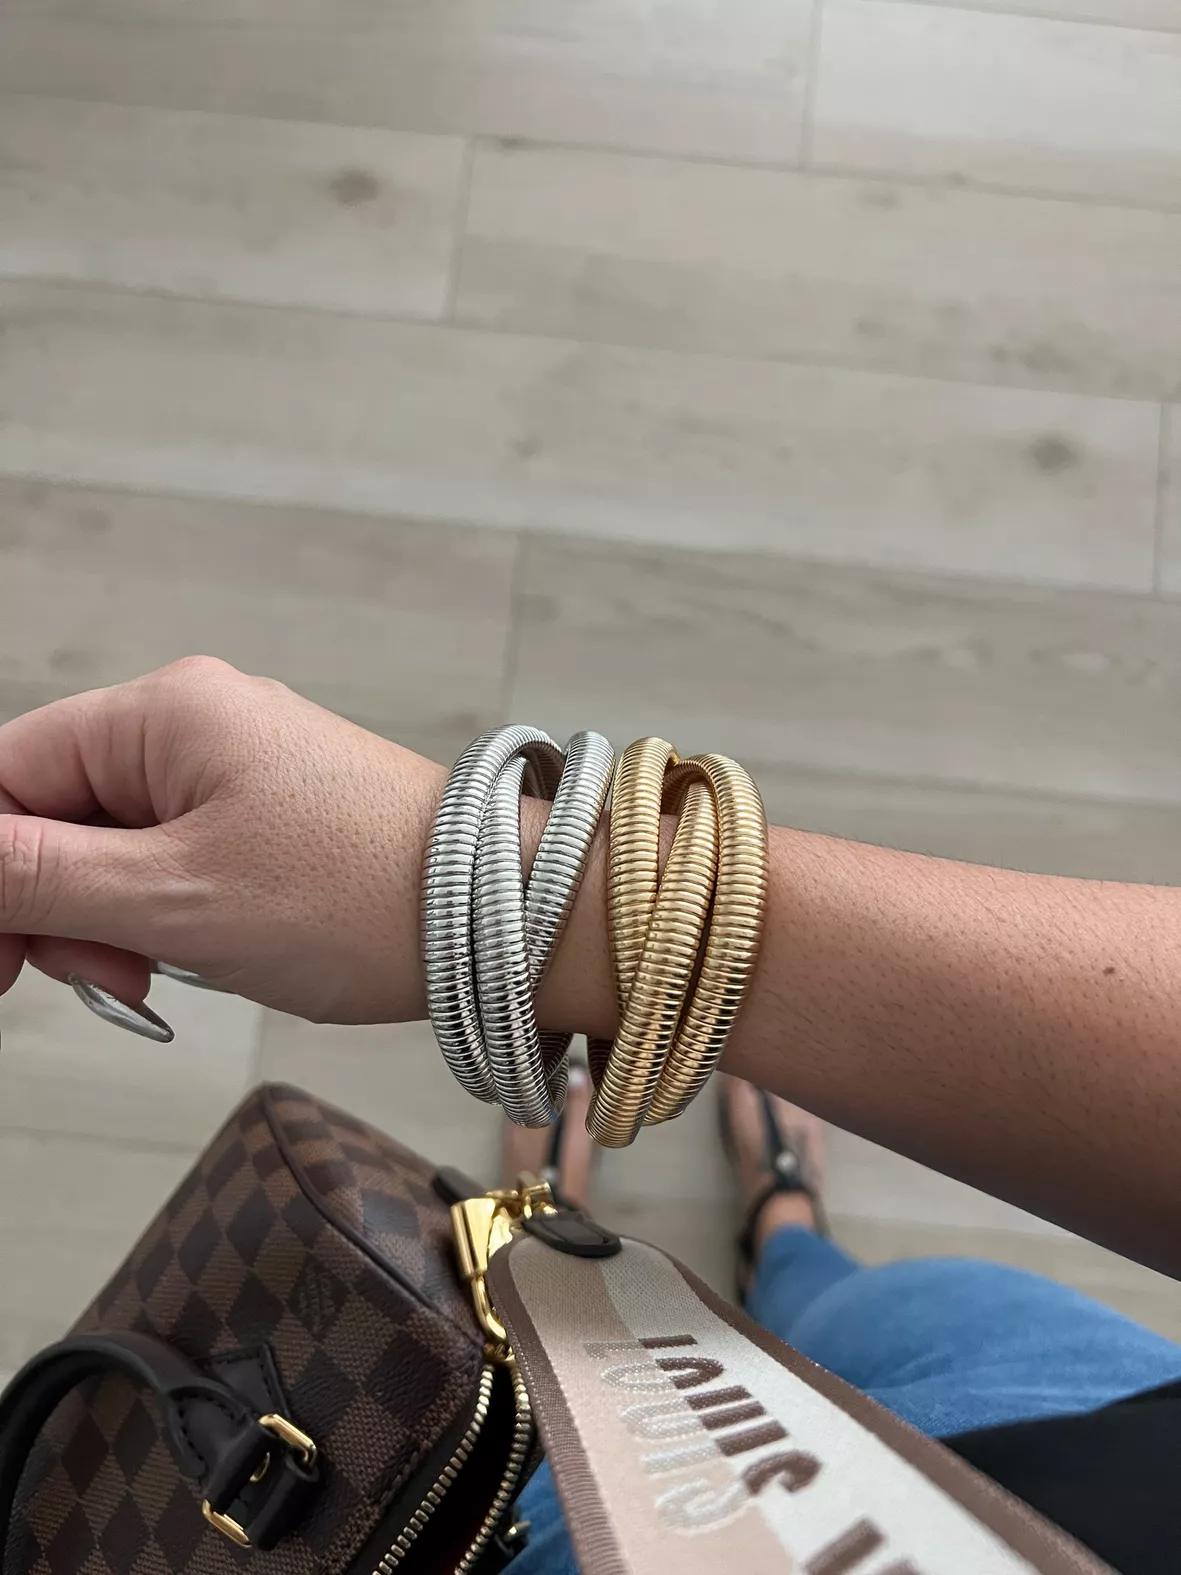 Louis Vuitton's Keep It bracelet in Damier. I want to get this in Azur as  well!